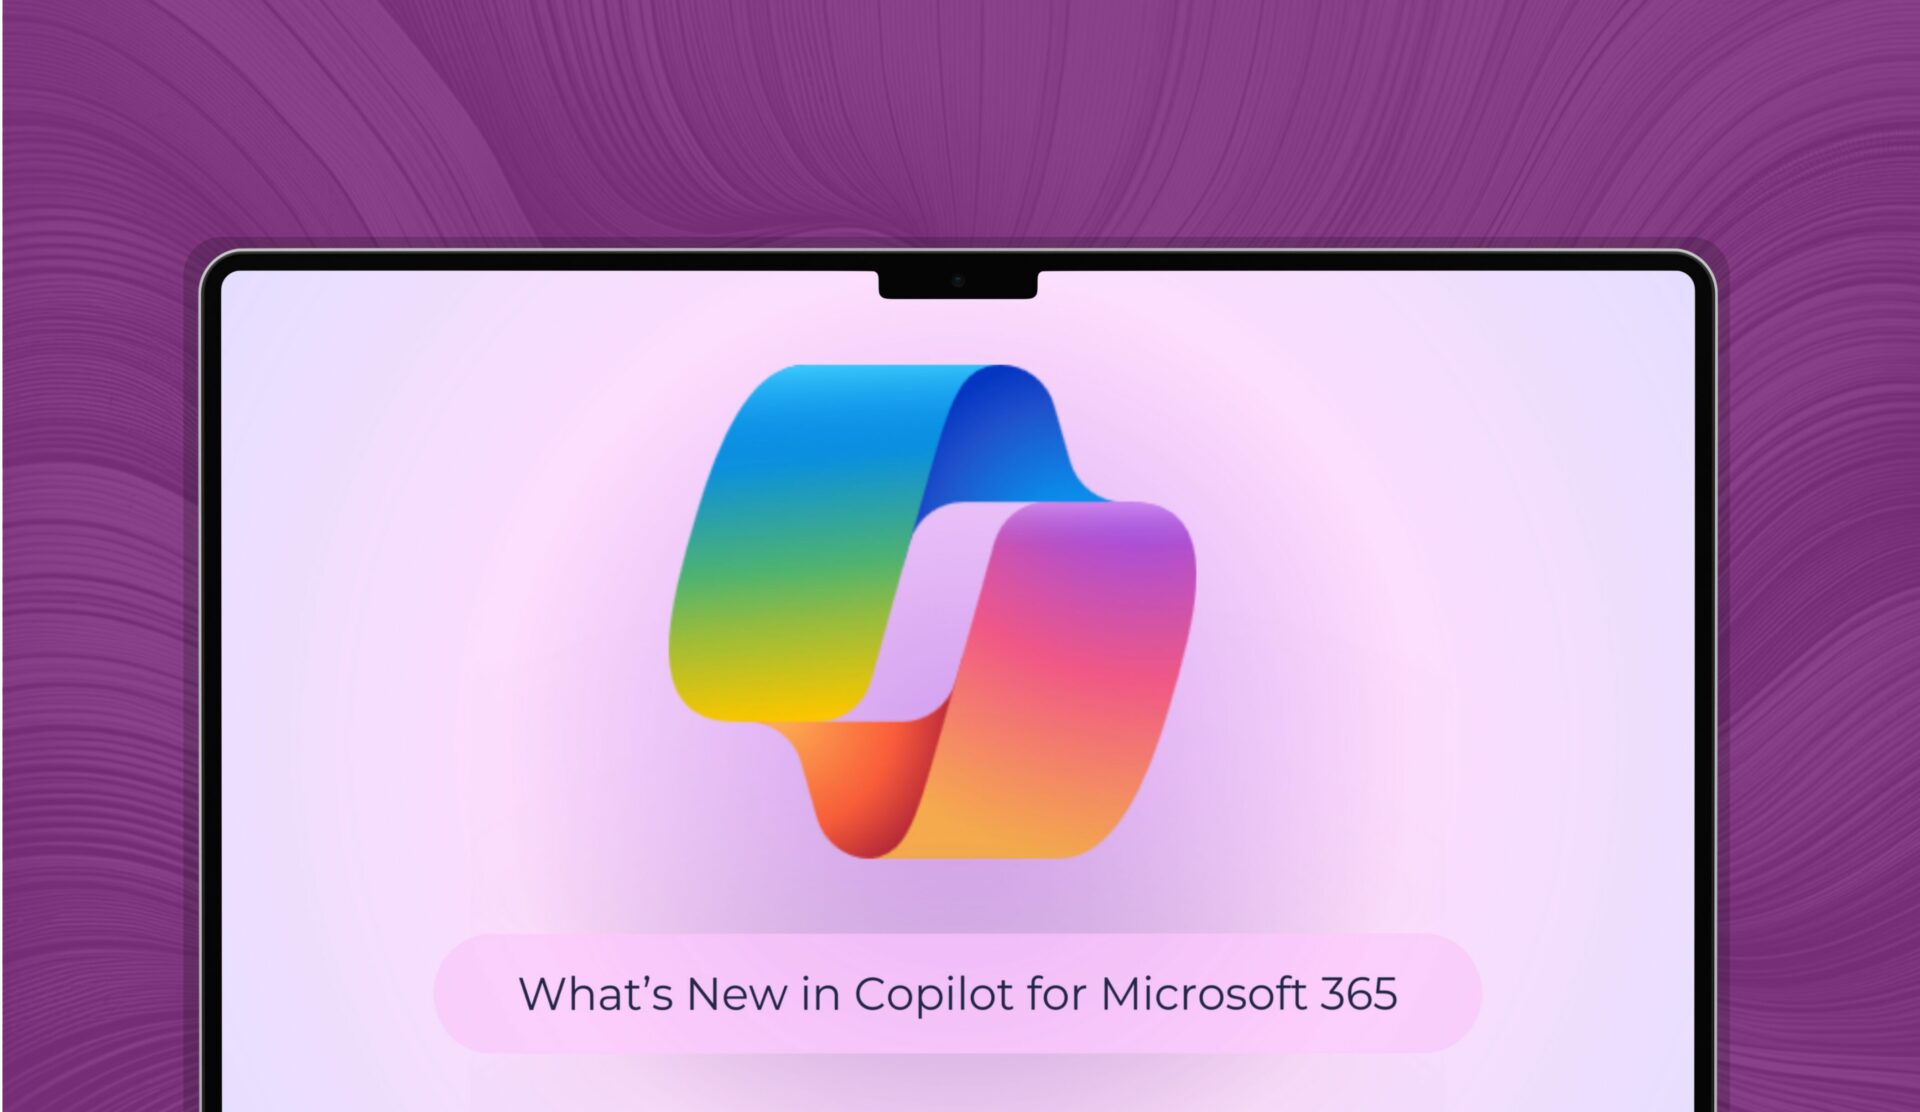 Copilot Logo and 'What's new in Copilot for Microsoft 365' written on a computer screen. On a purple background.